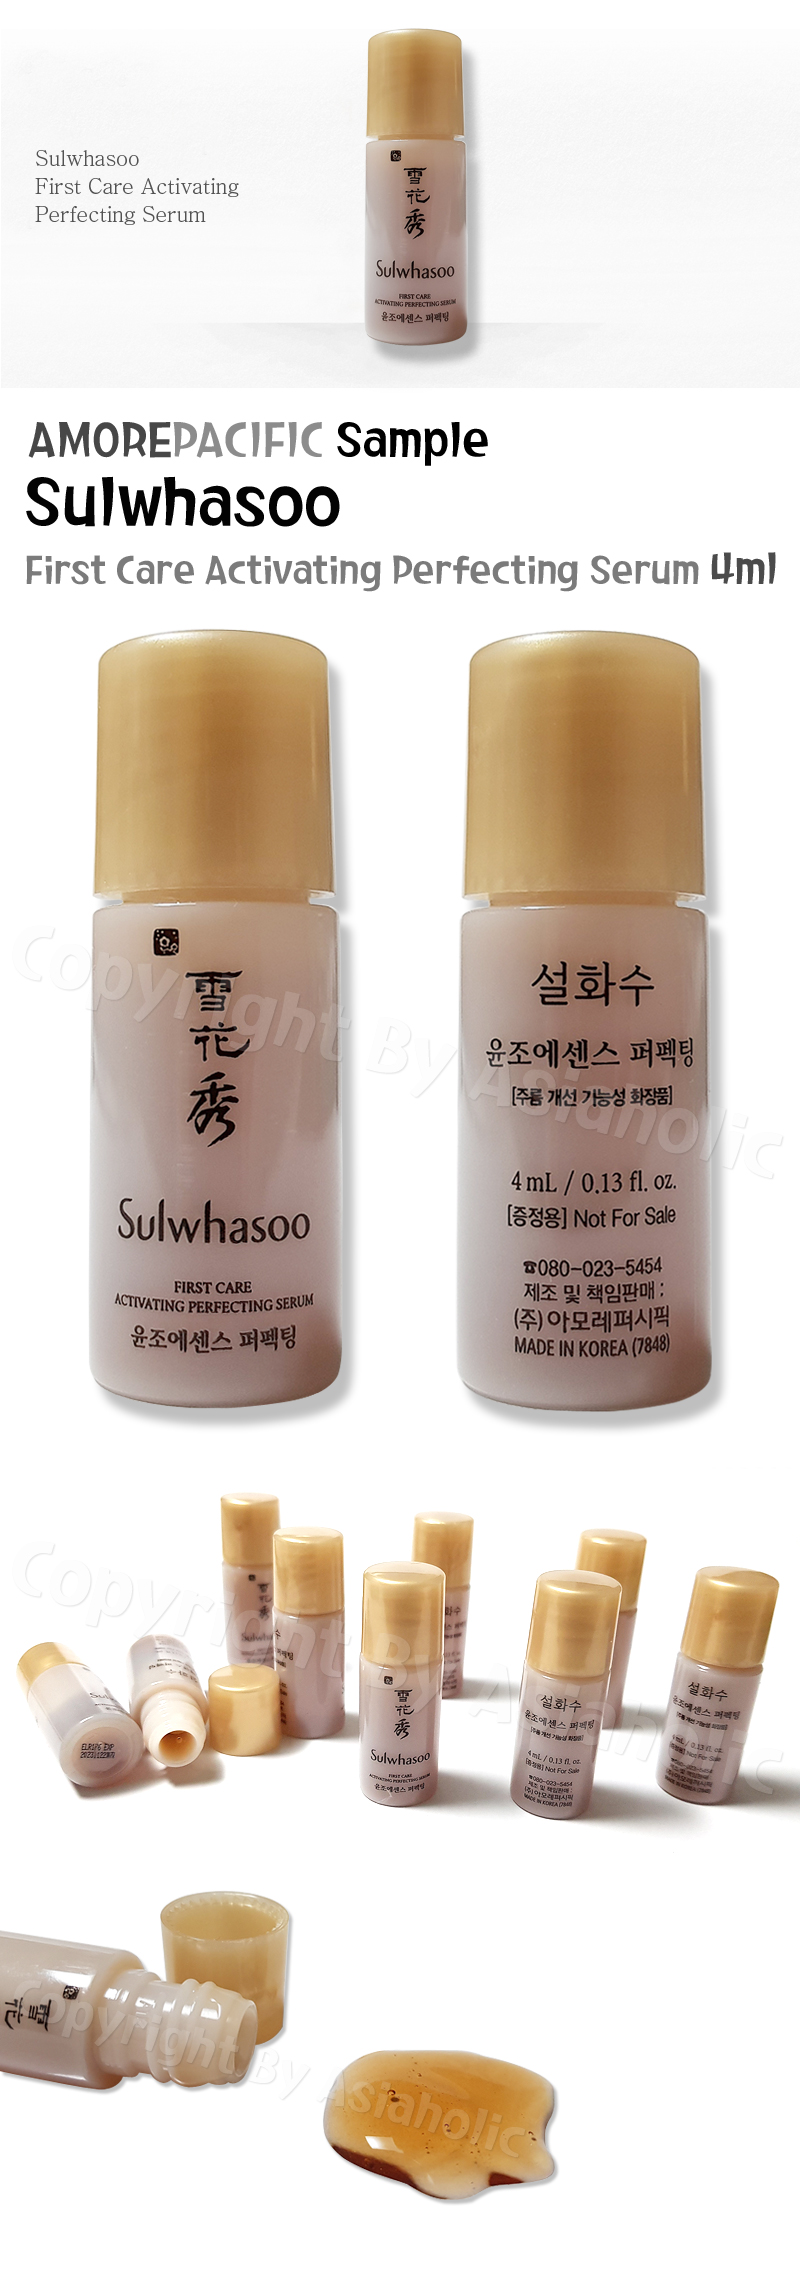 Sulwhasoo First Care Activating Perfecting Serum 4ml x 20pcs (80ml) Sample Newest Version